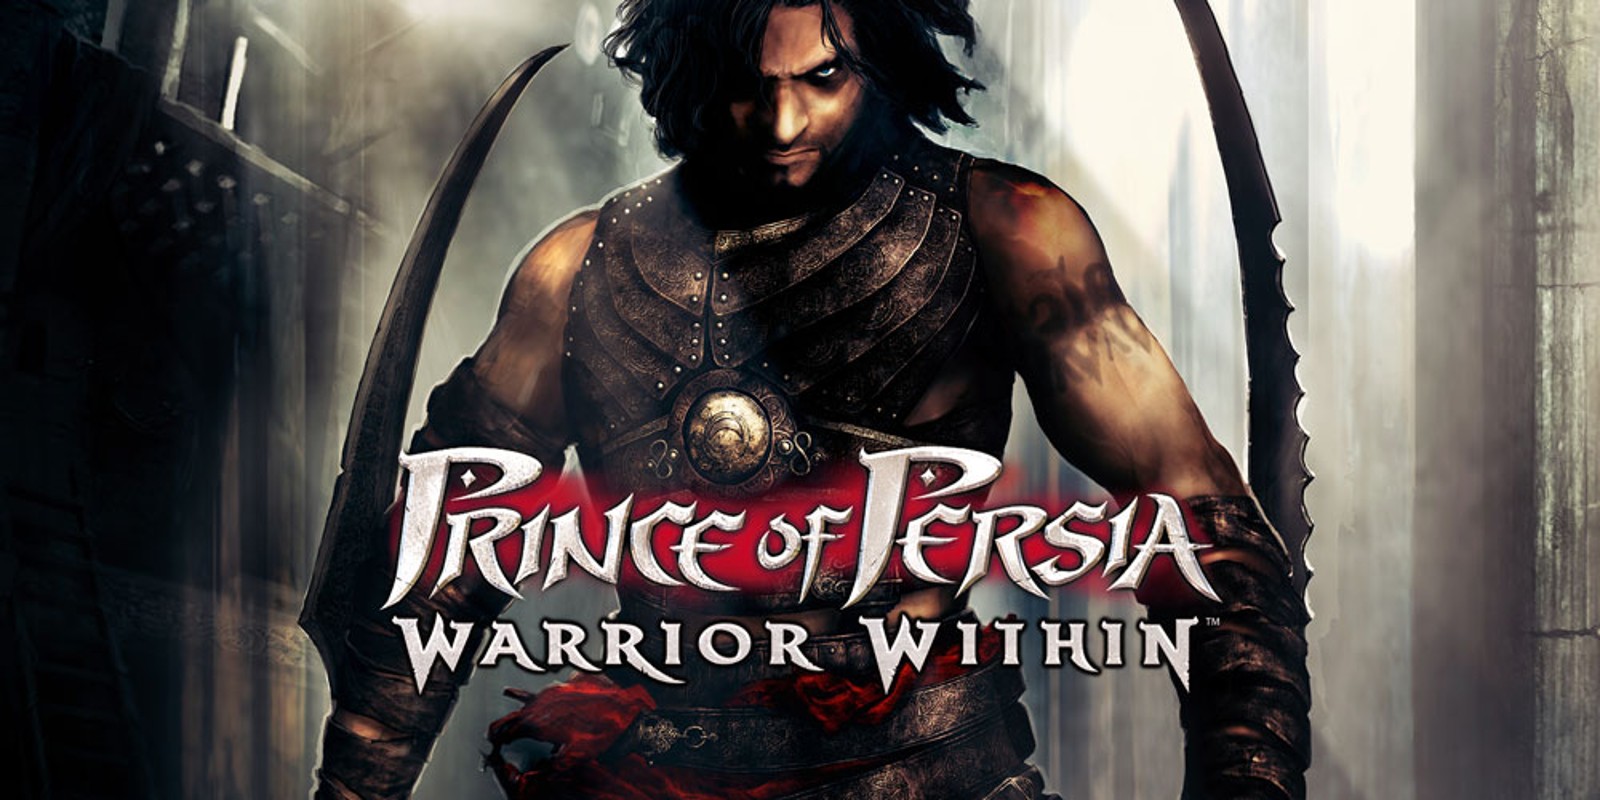 Prince of persia warrior within steam фото 2